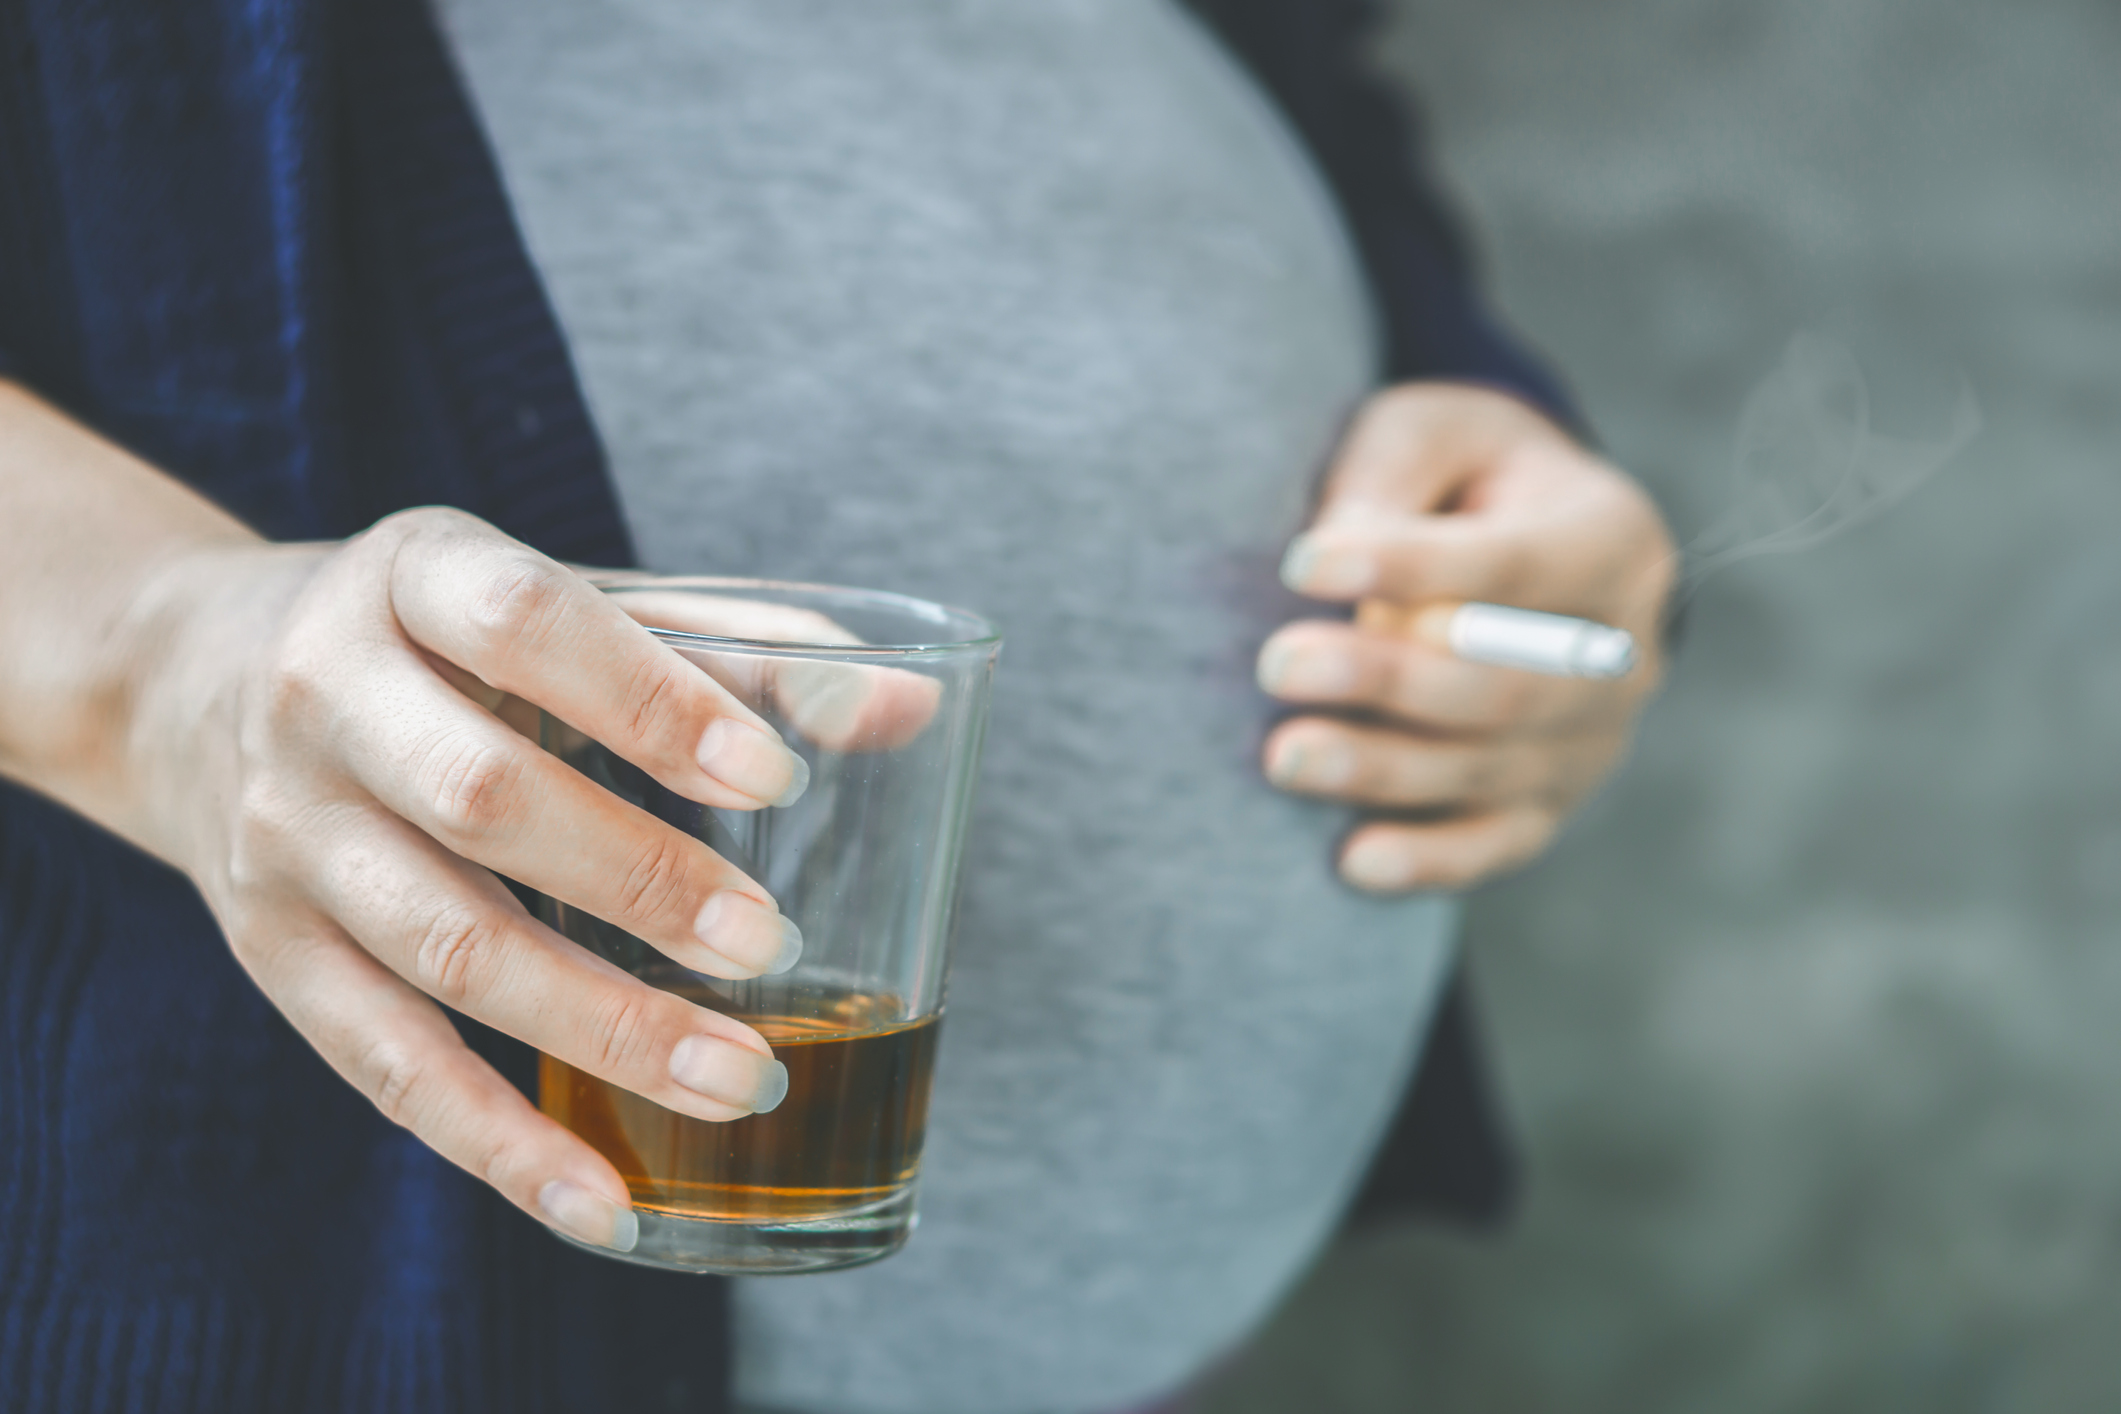 Pregnant woman holding glass of alcohol and cigarette